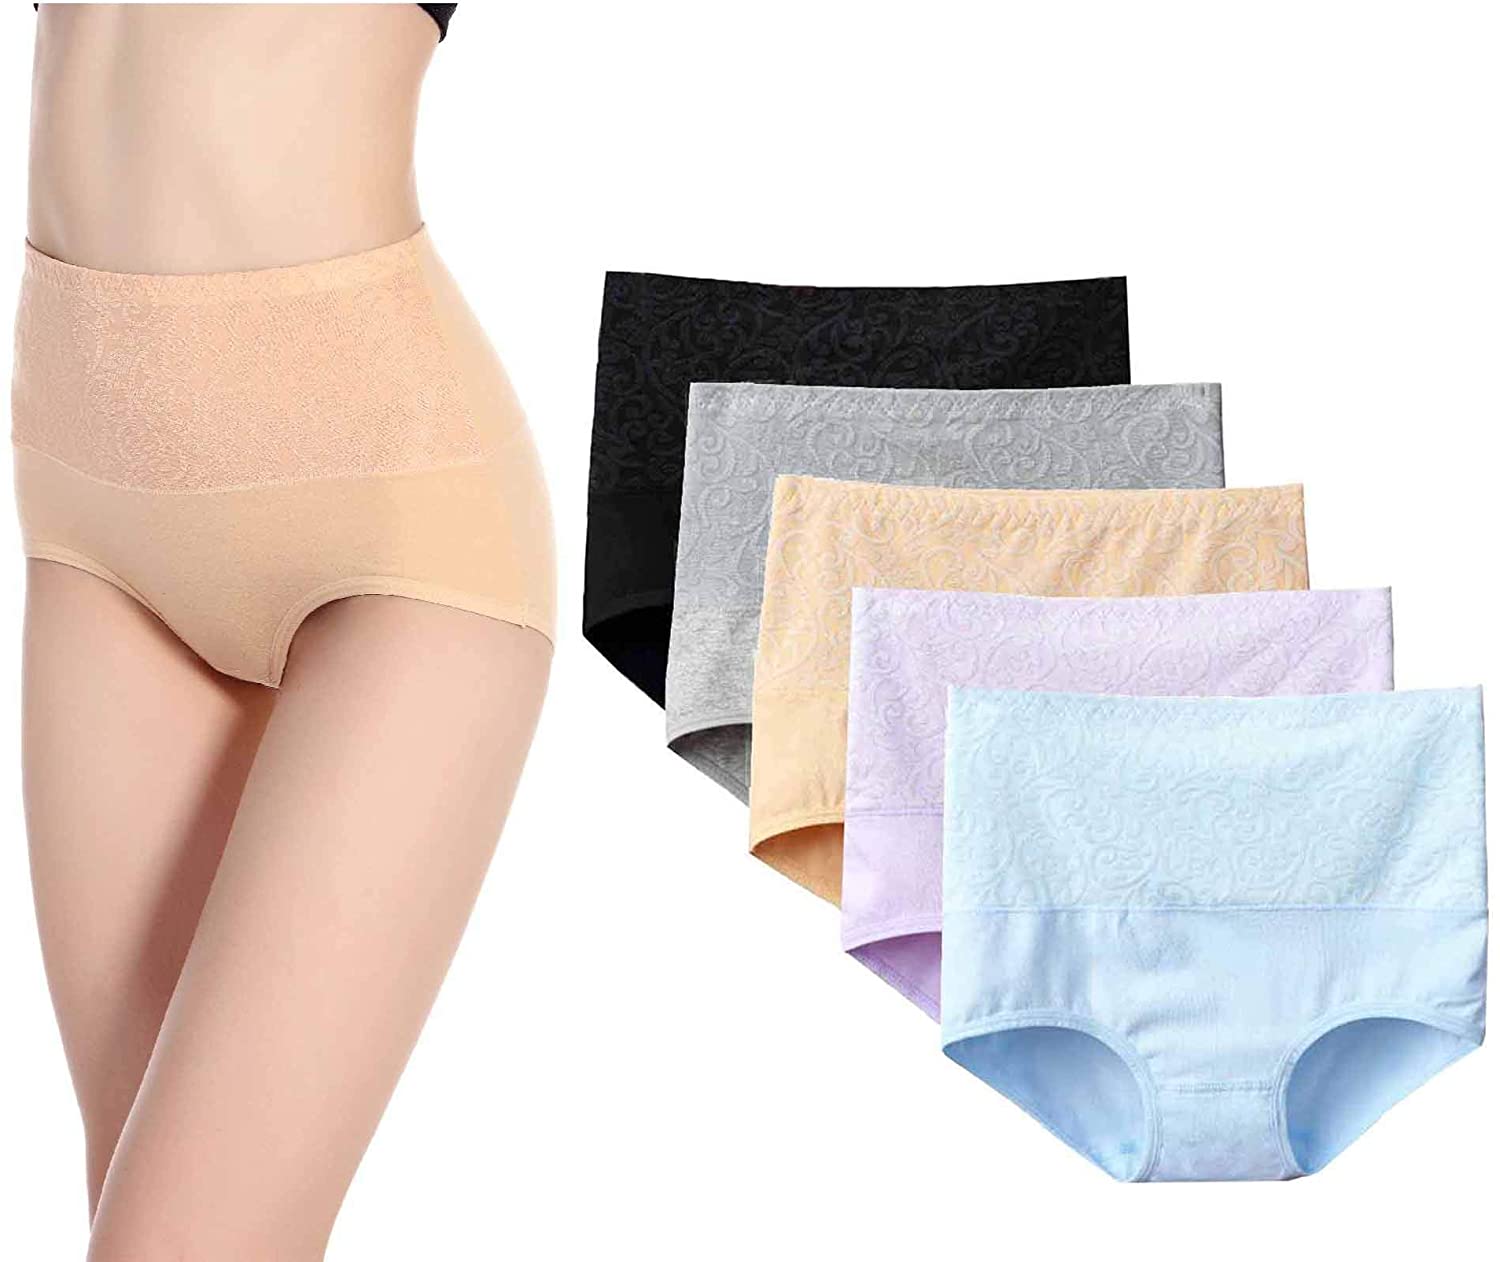 High Waist Tummy Control Panties for Women, Cotton Underwear No Muffin Top  Shapewear Brief Panties (3 Pack,Fresh color, L) price in UAE,  UAE